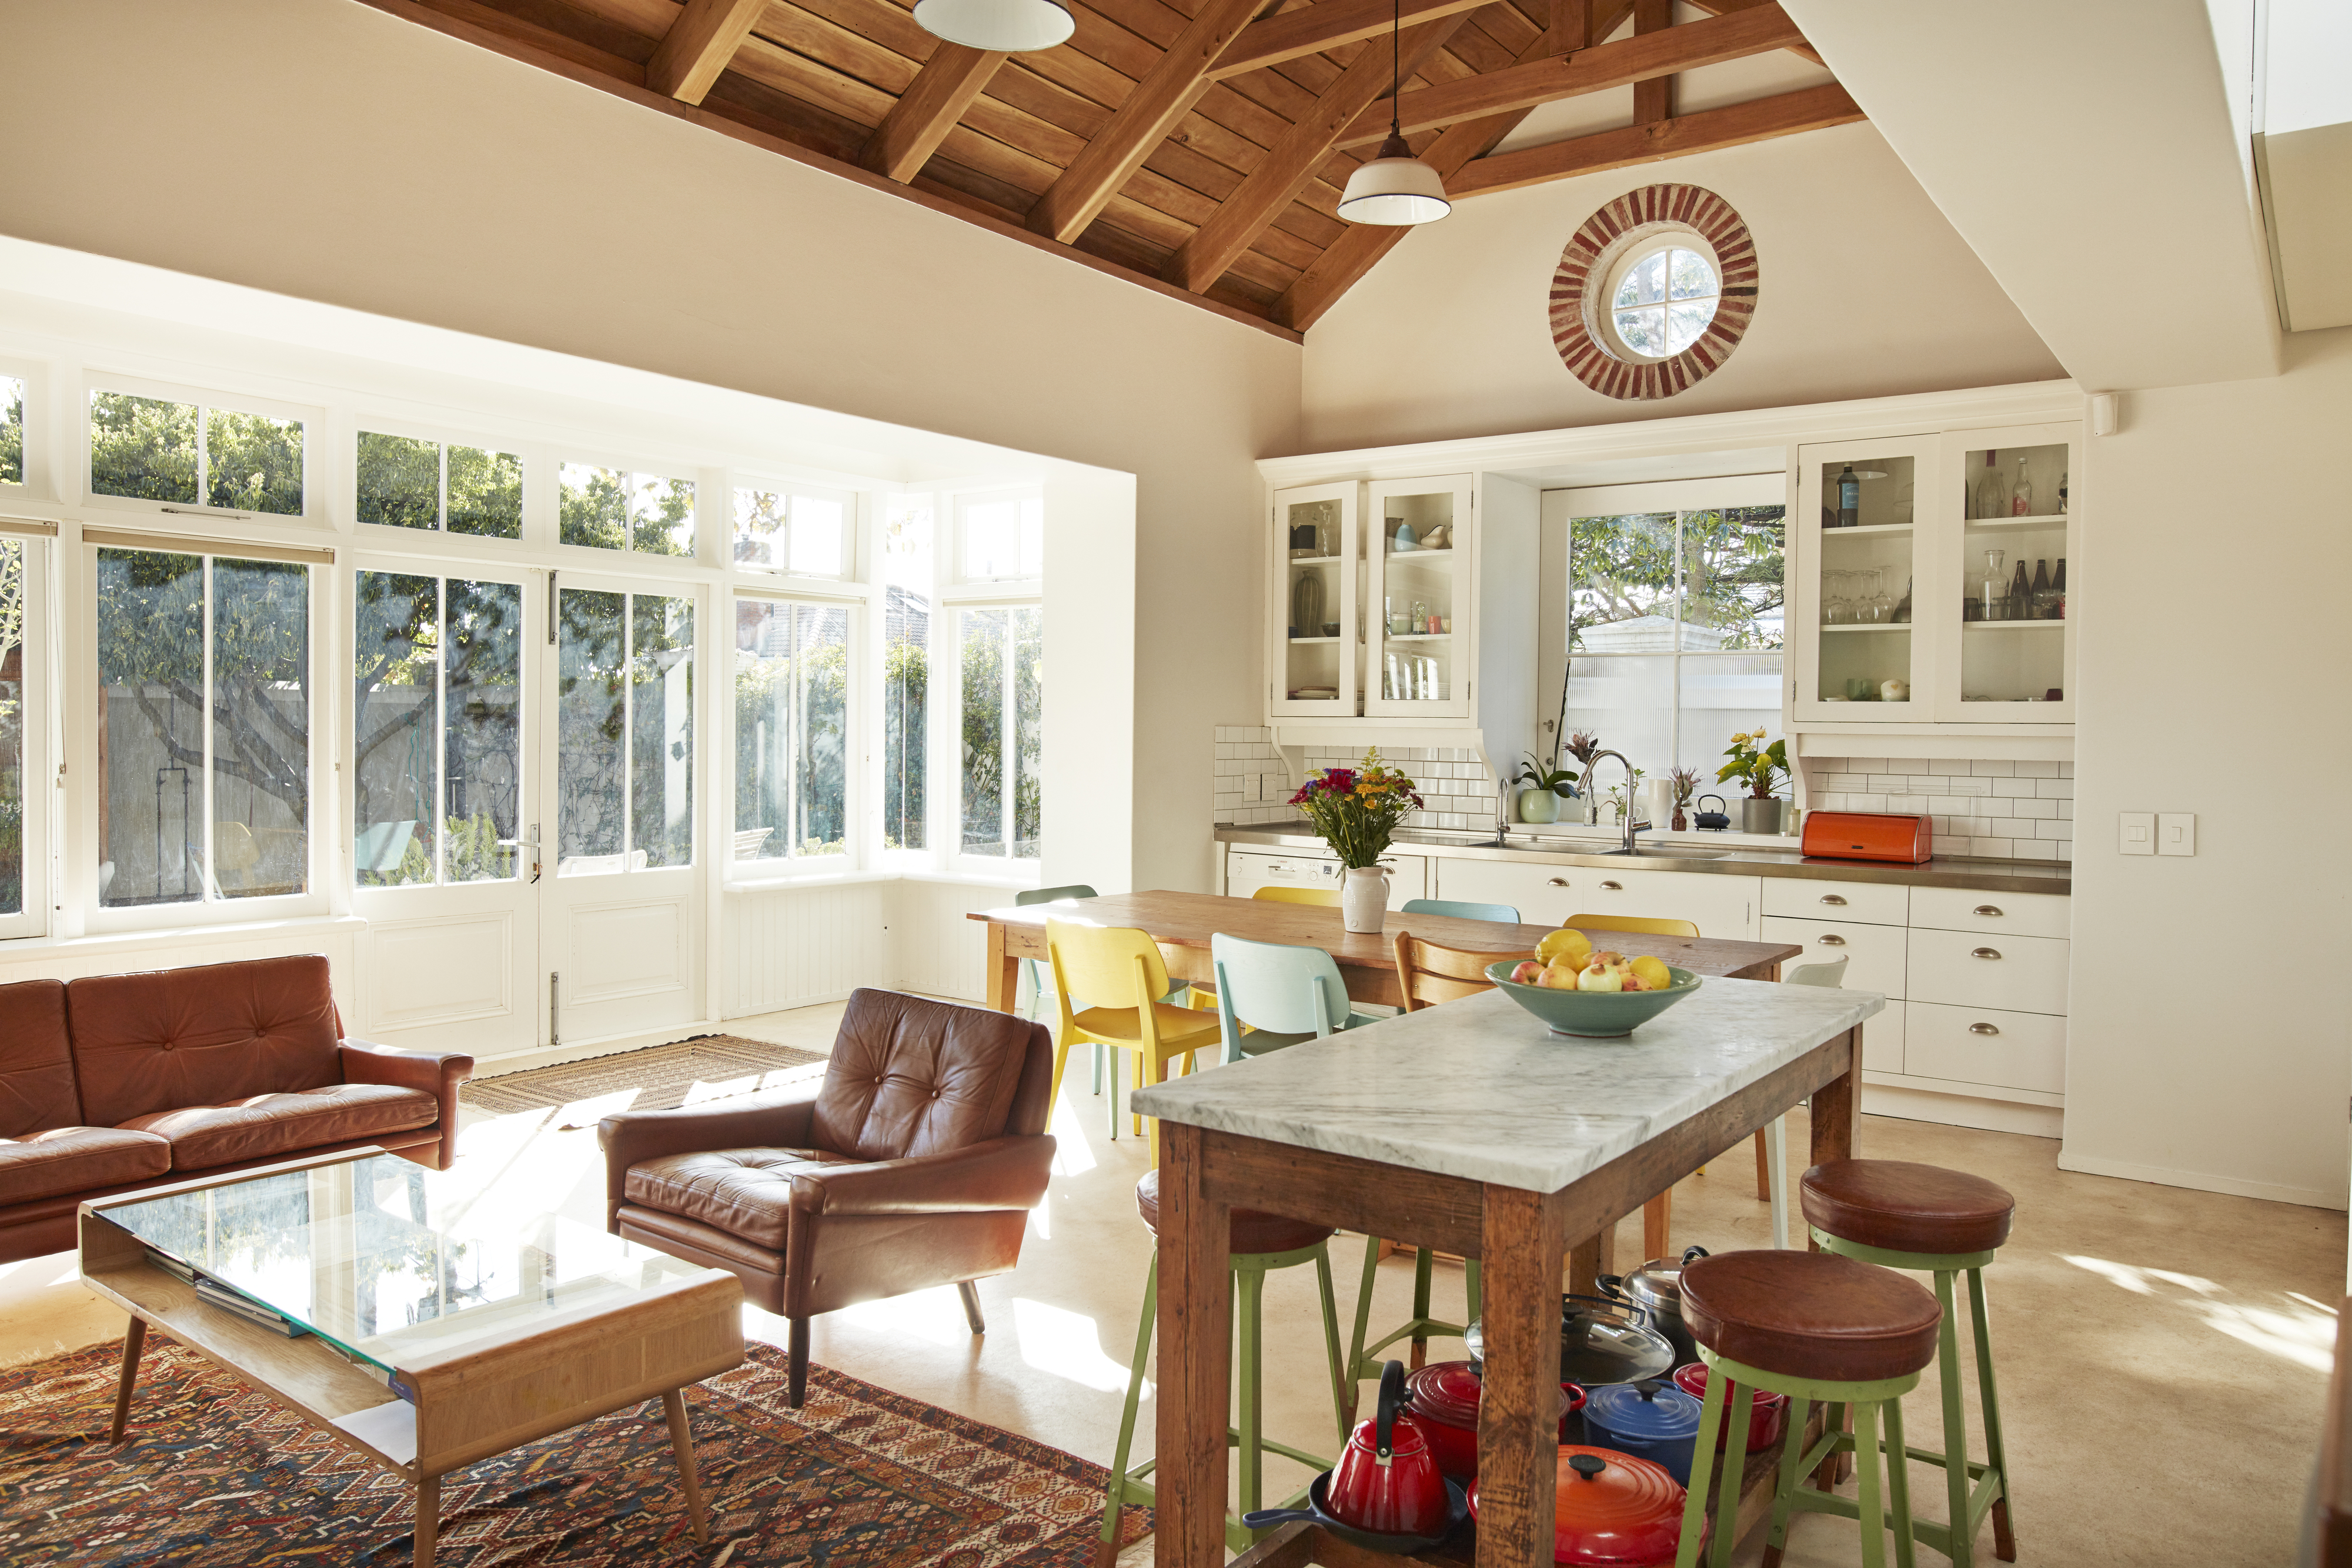 vaulted wood ceiling in a kitchen and living room area